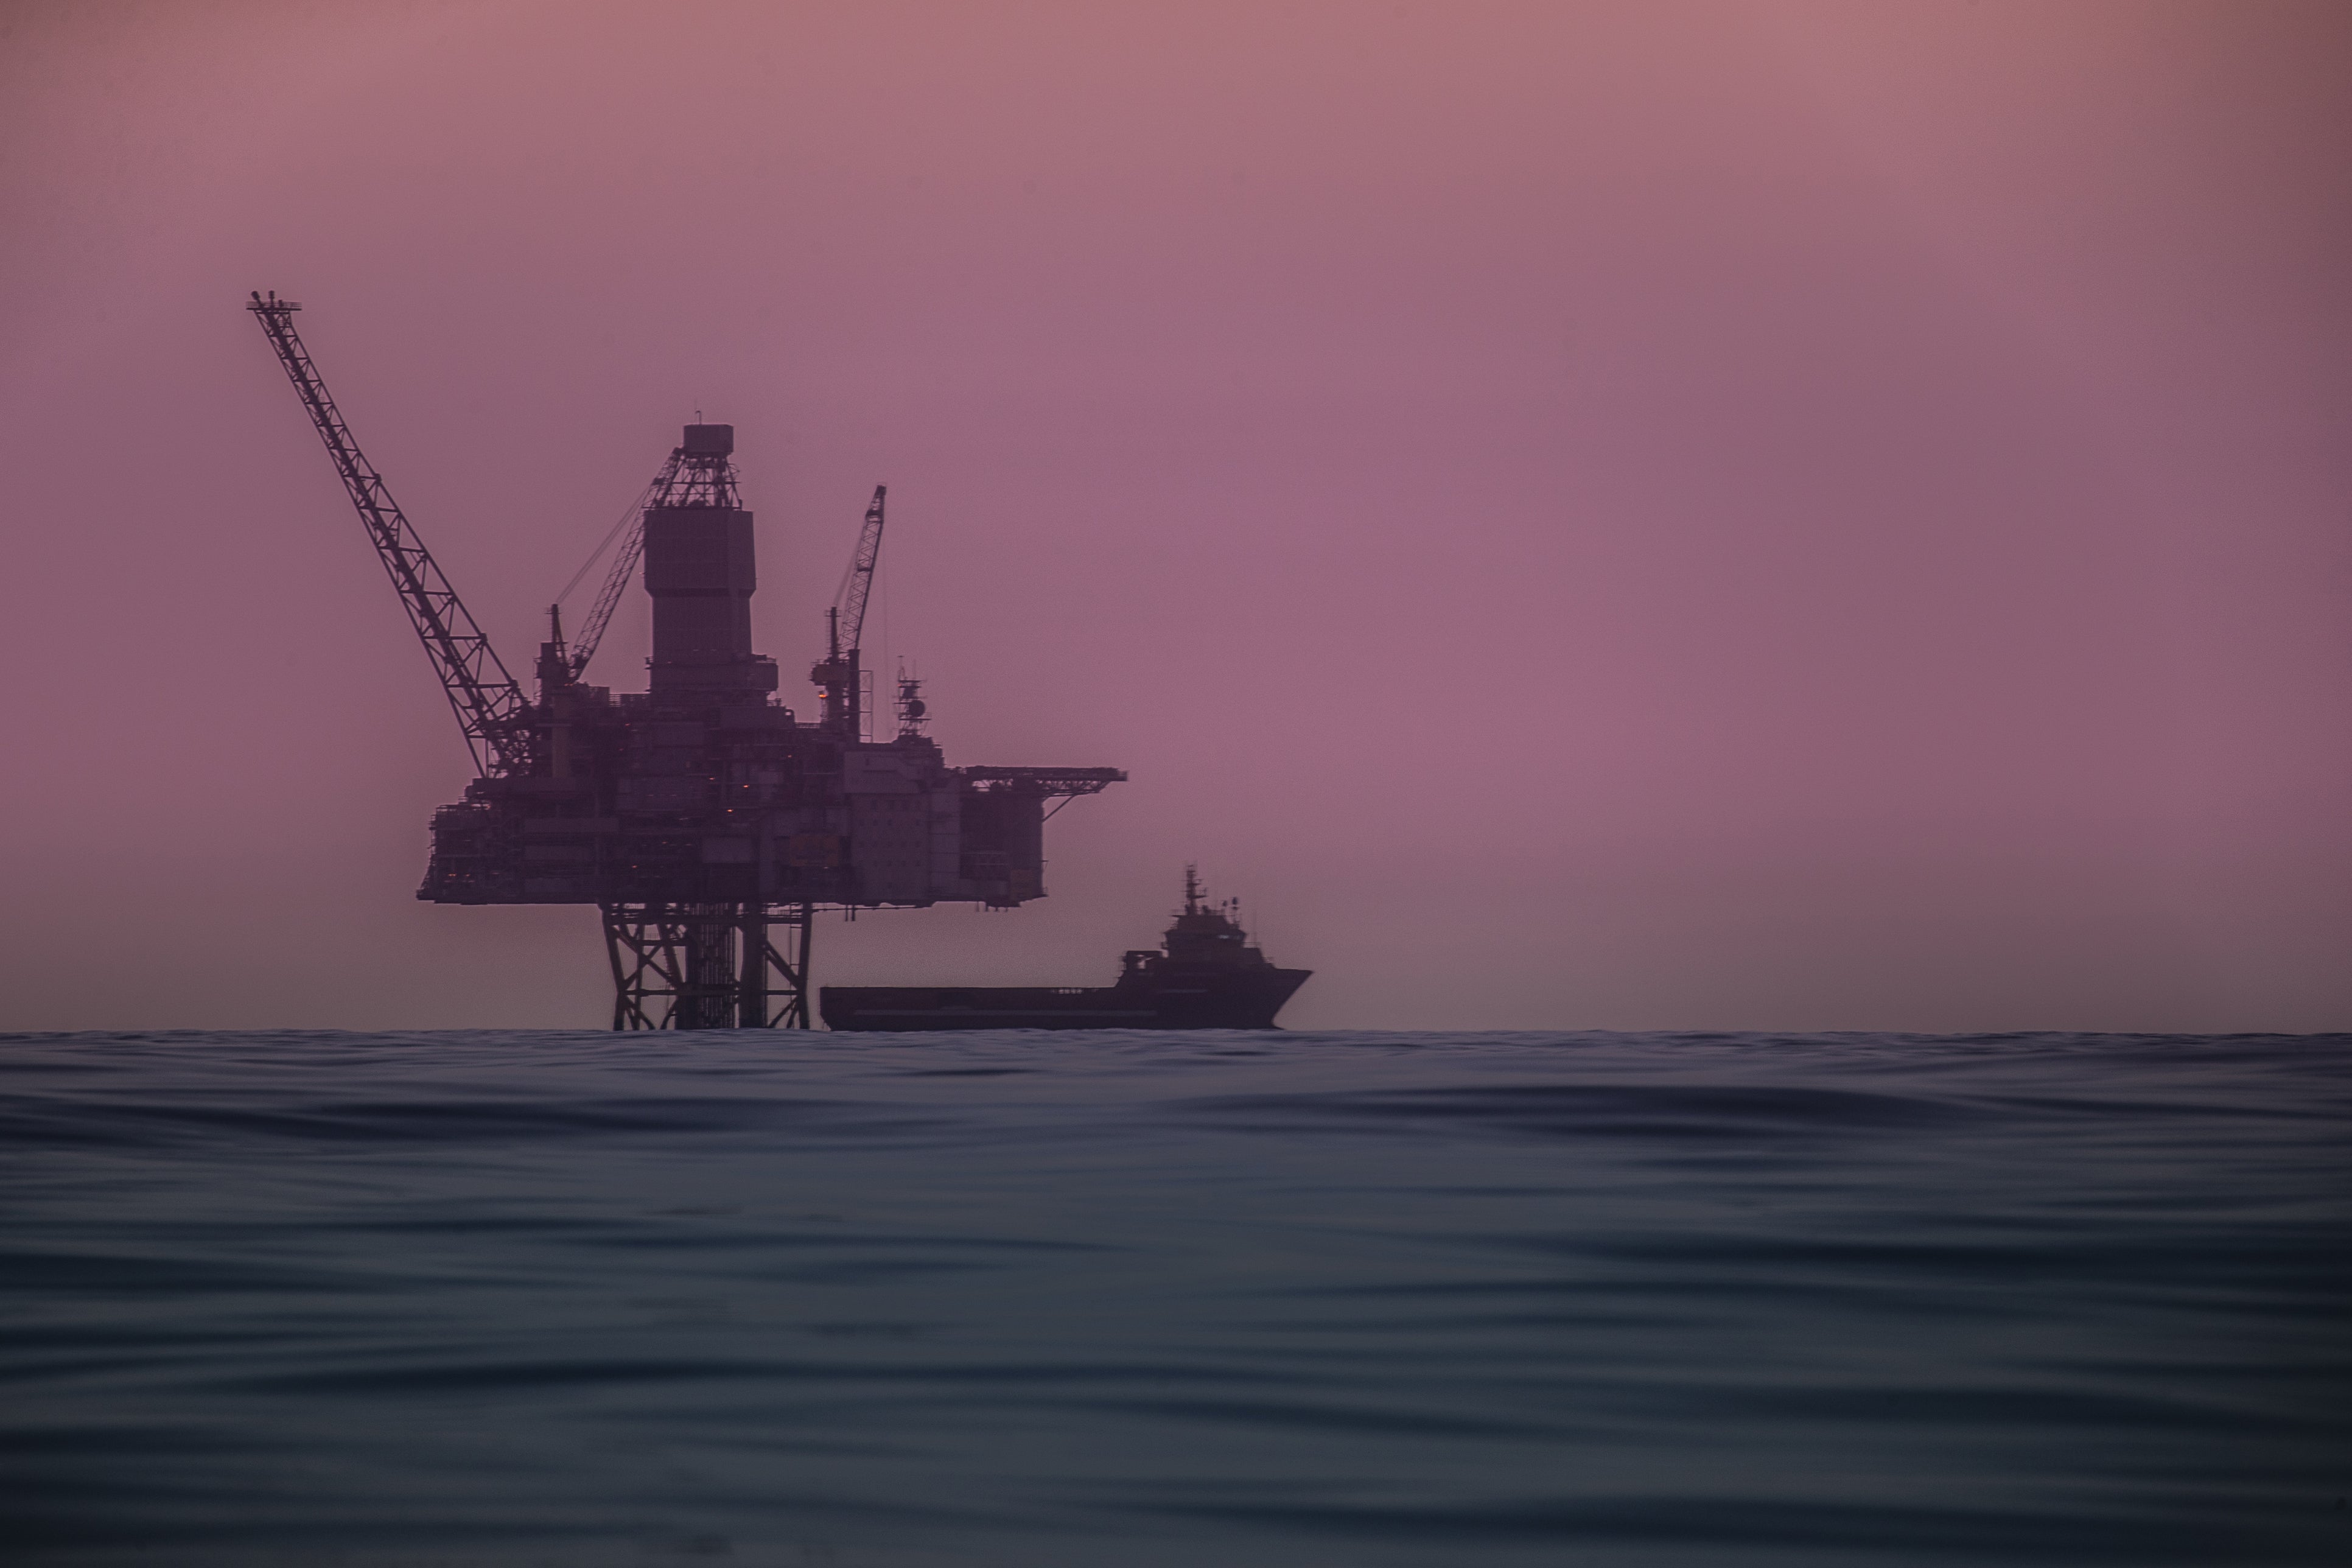 An end to new oil and gas fields could be in the financial interests of fossil fuel companies